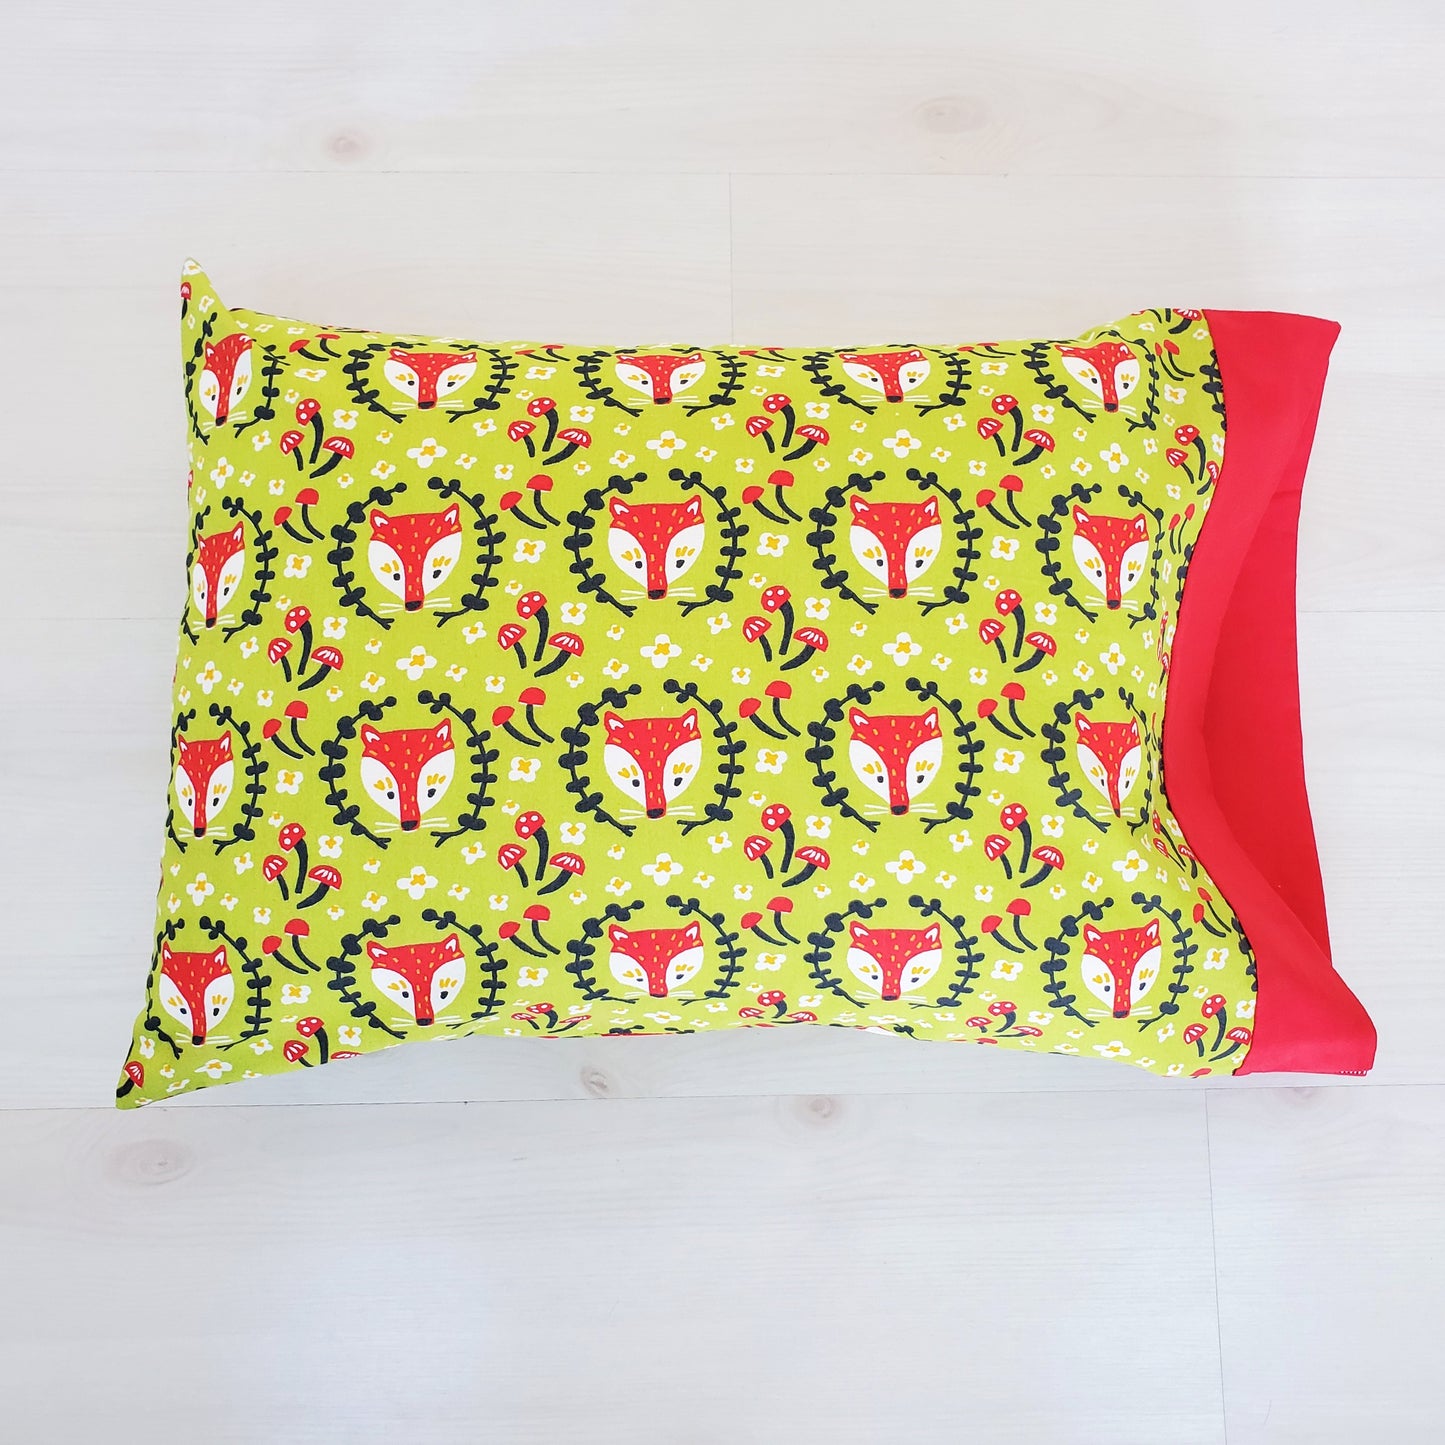 Organic Cotton Pillowcases with Foxes on Green Or Cream